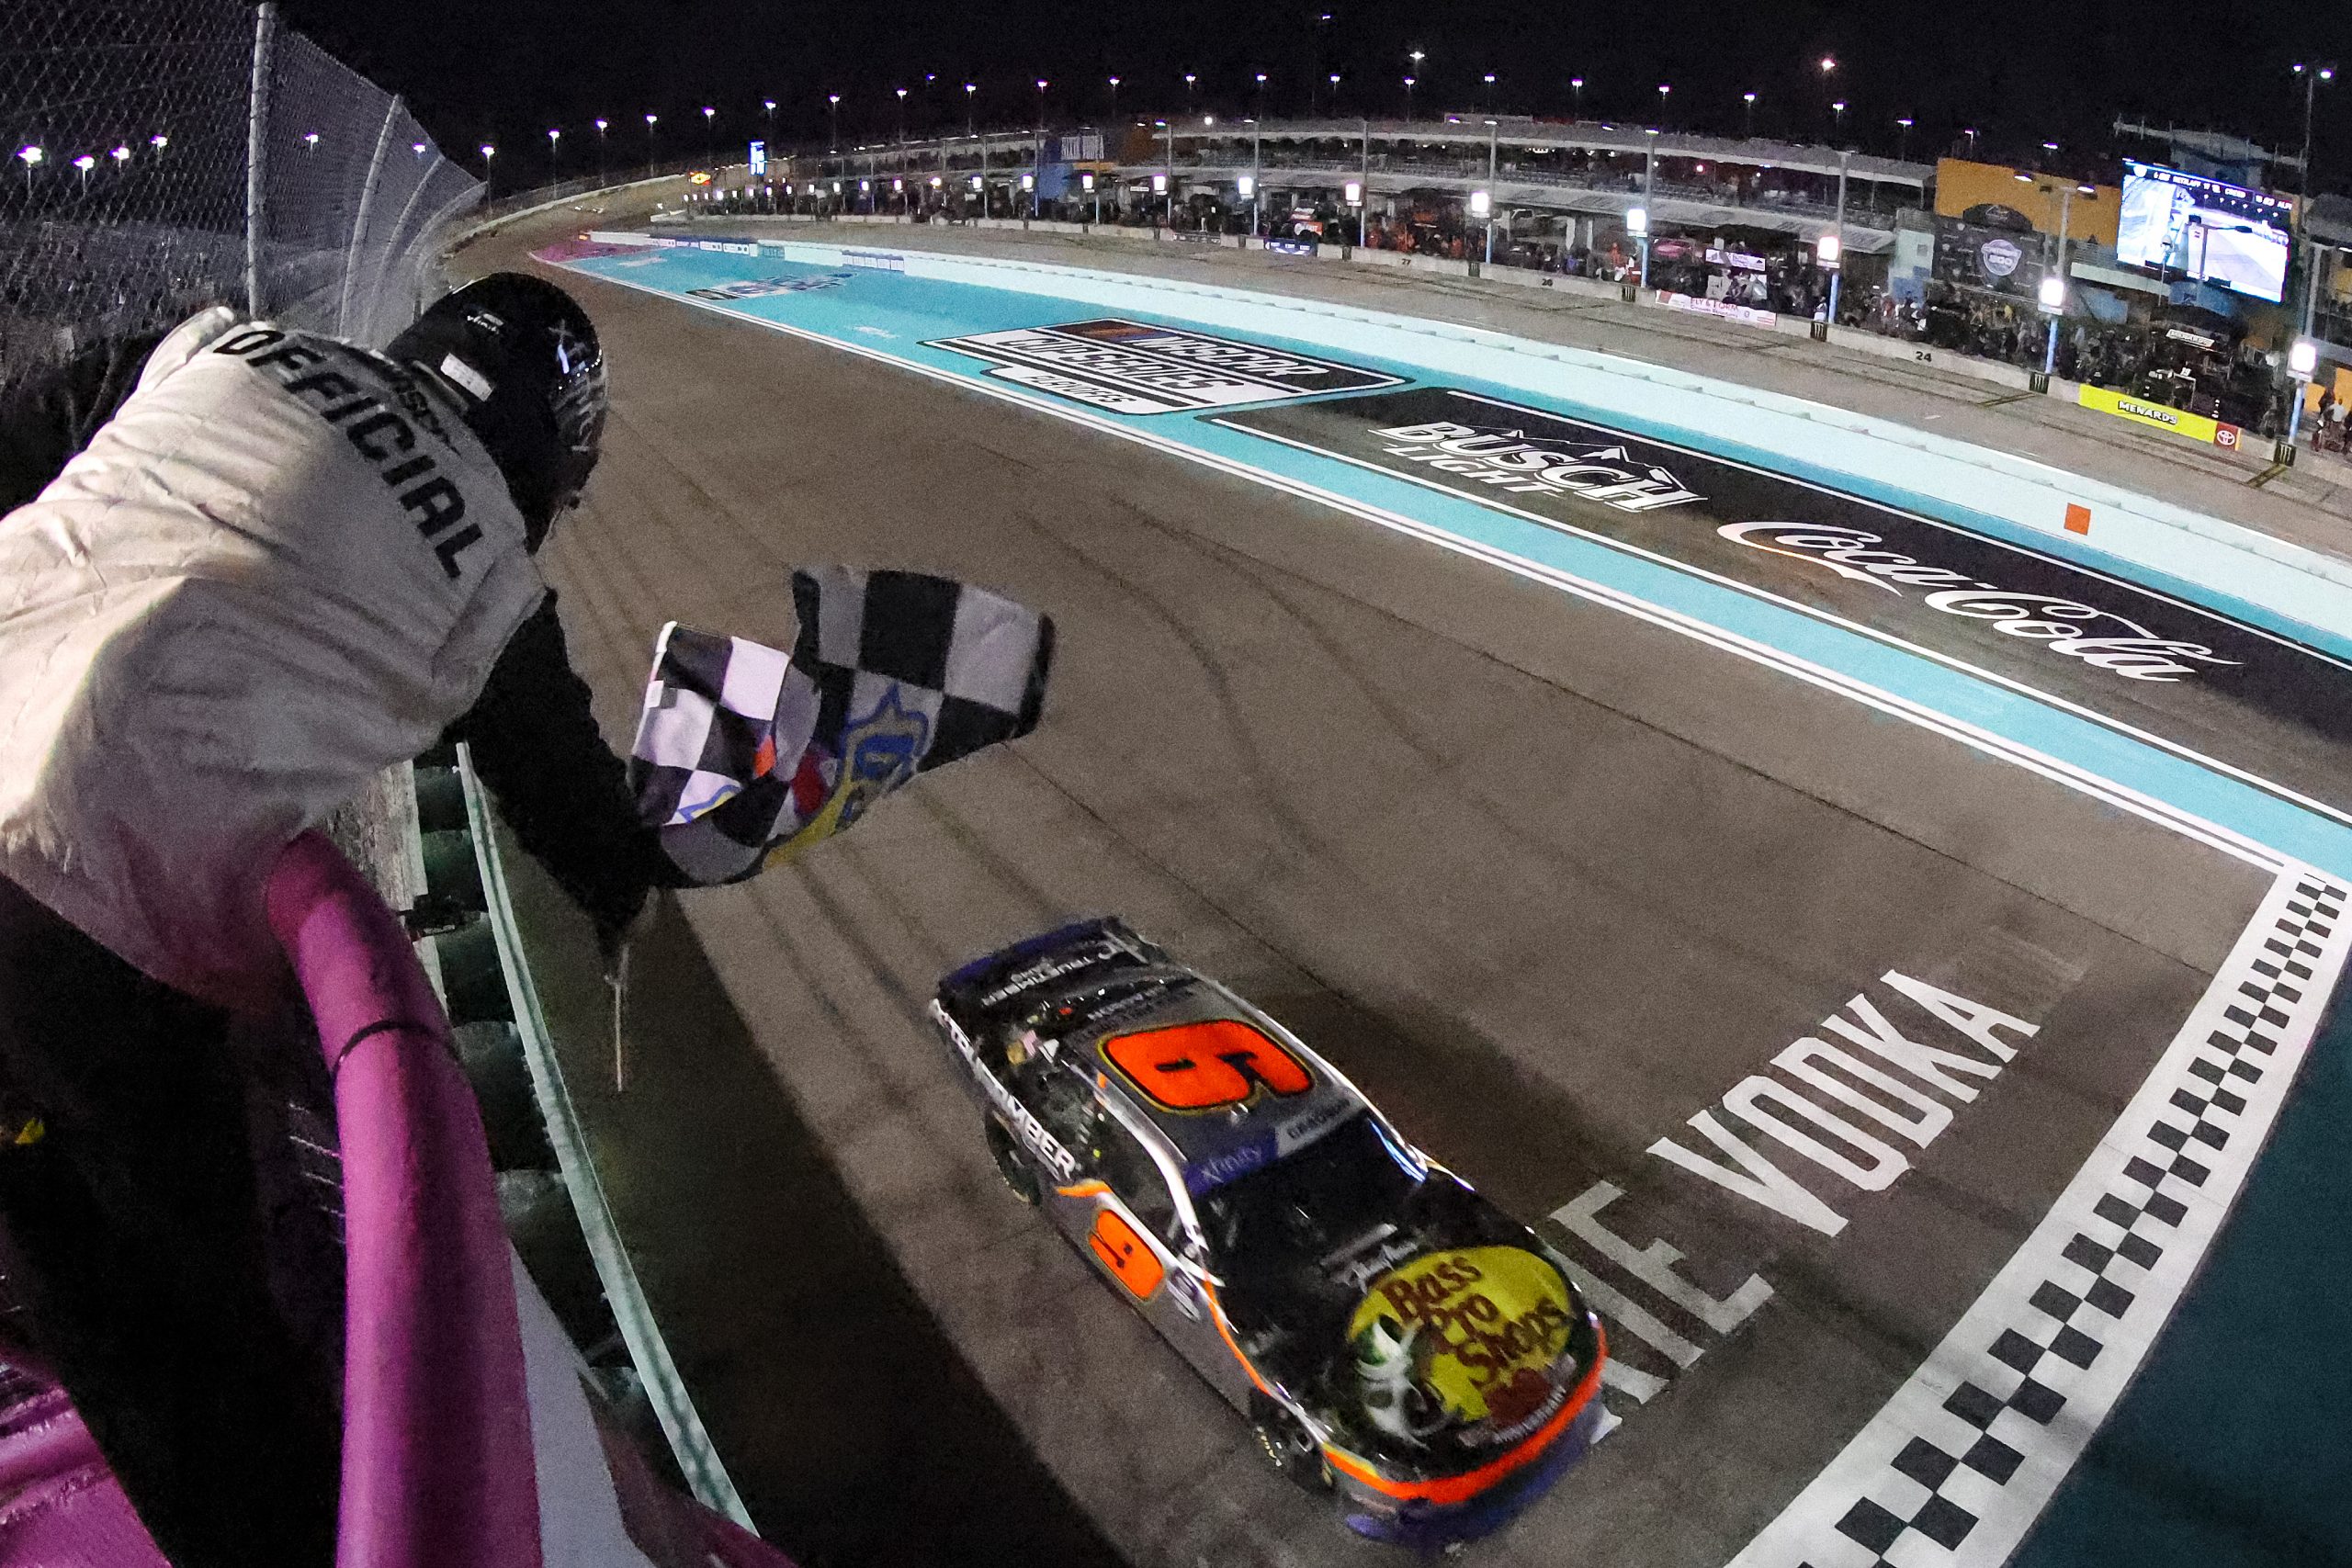 HOMESTEAD, FLORIDA - OCTOBER 22: Noah Gragson, driver of the #9 Bass Pro Shops/TrueTimber/BRCC Chevrolet, takes the checkered flag to win the NASCAR Xfinity Series Contender Boats 300 at Homestead-Miami Speedway on October 22, 2022 in Homestead, Florida. (Photo by Jared East/Getty Images)